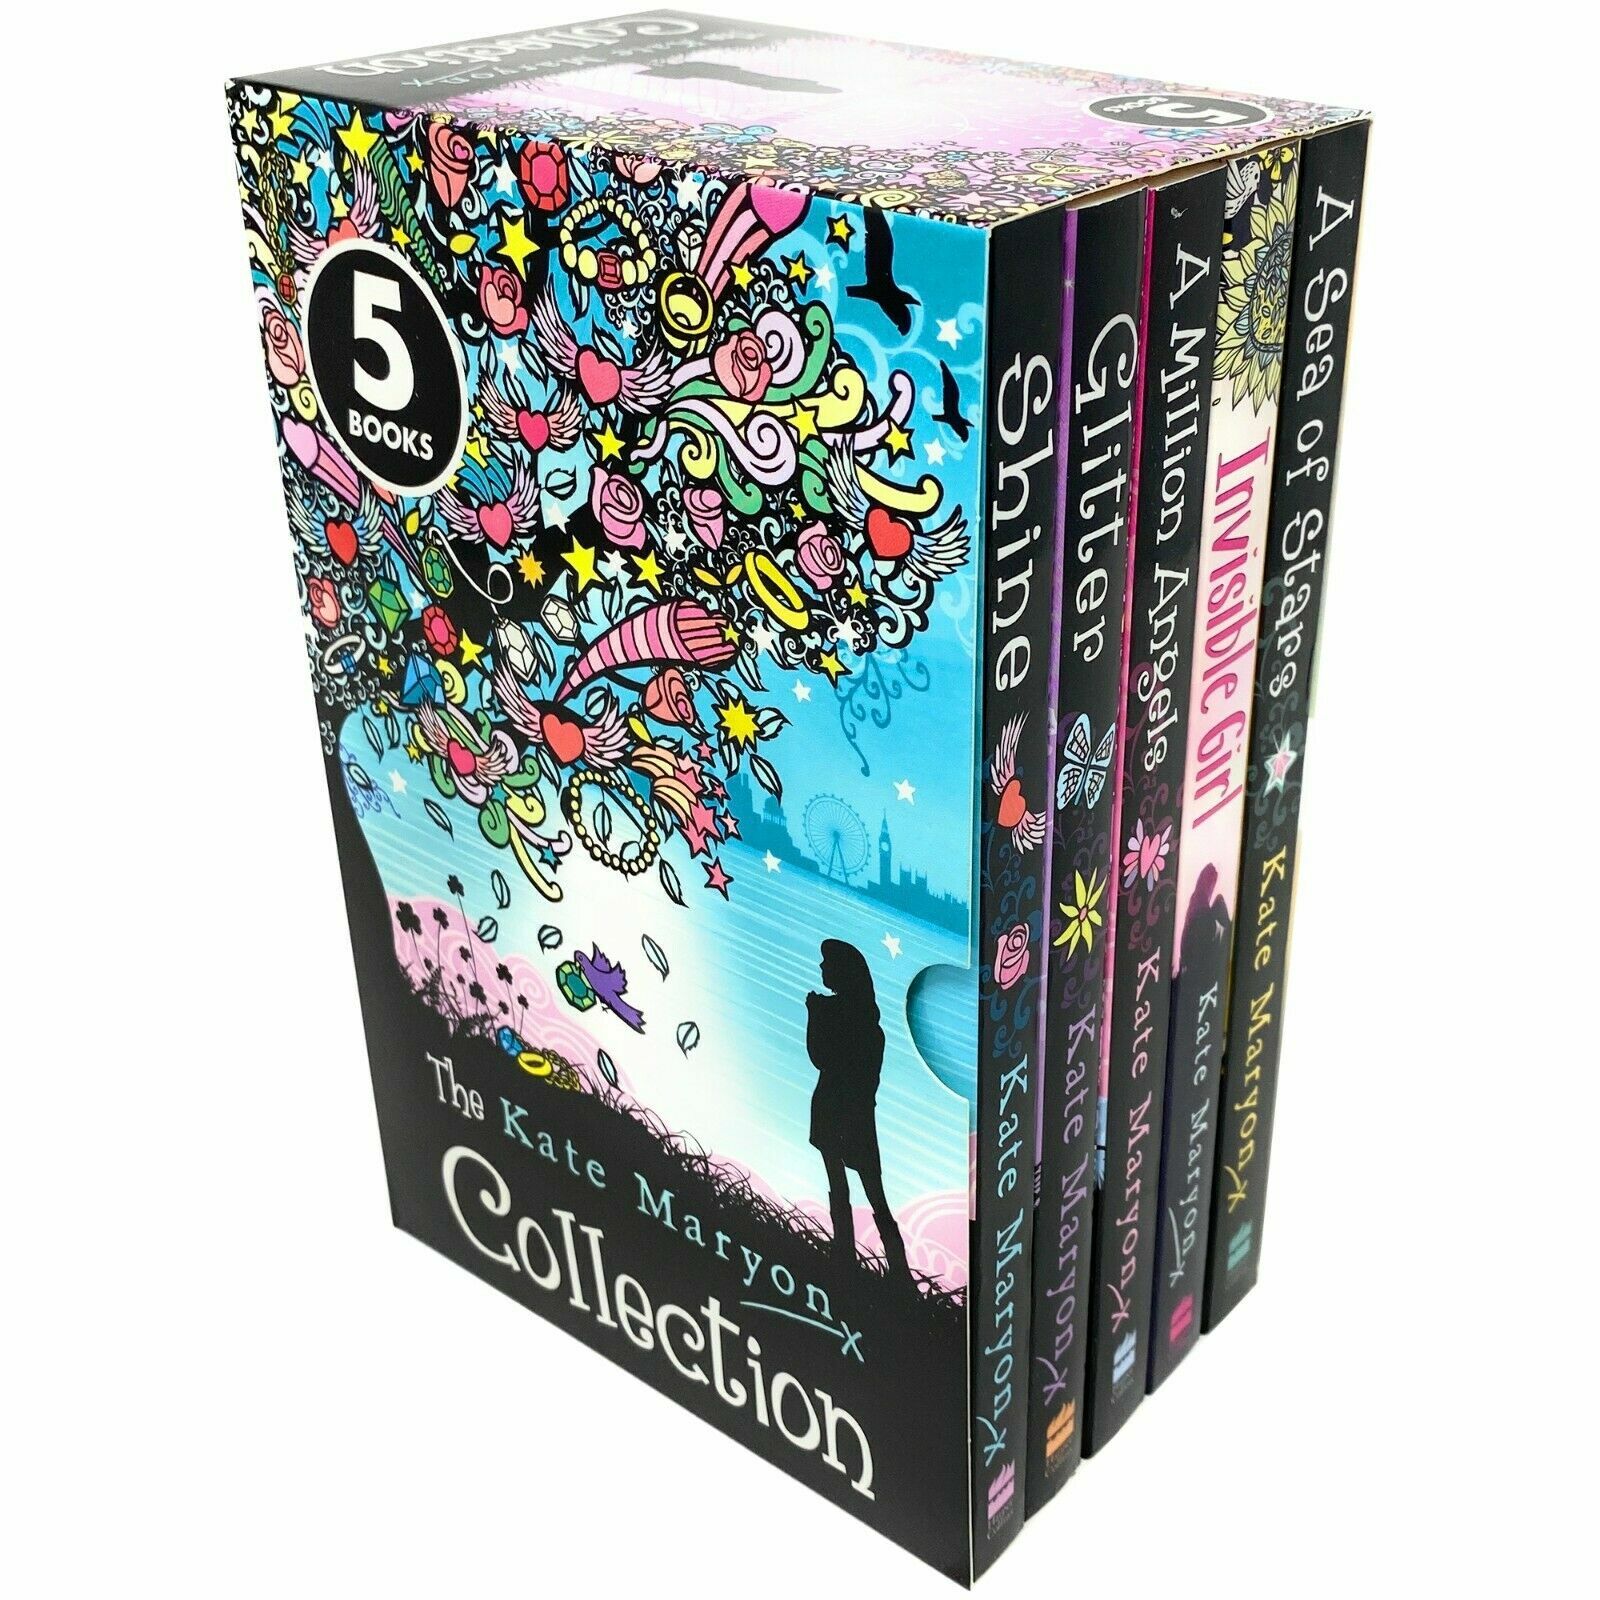 The Kate Maryon Collection 5 Books Box Set (Paperback 5권)